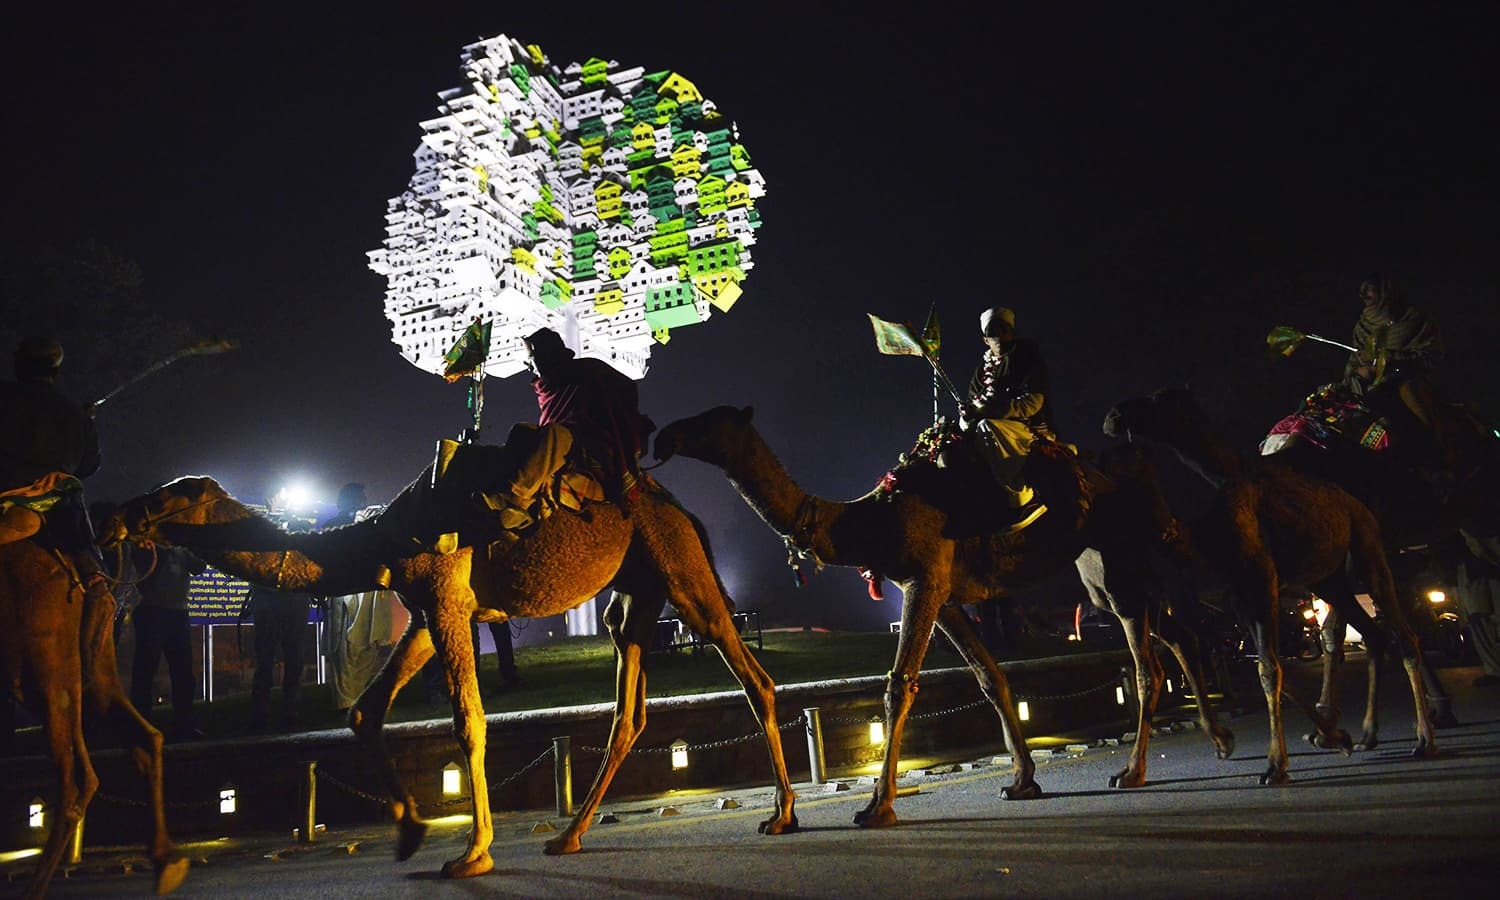 Pakistani Muslims ride on a camel during a rally to celebrate the birthday of Prophet Mohammed in Lahore on December 23, 2015. The birthday of Prophet Mohammed, also known as 'Milad', is celebrated during the Islamic month of Rabi al-Awwal, which falls on December 24, 2015 in Pakistan. AFP PHOTO / Arif ALI